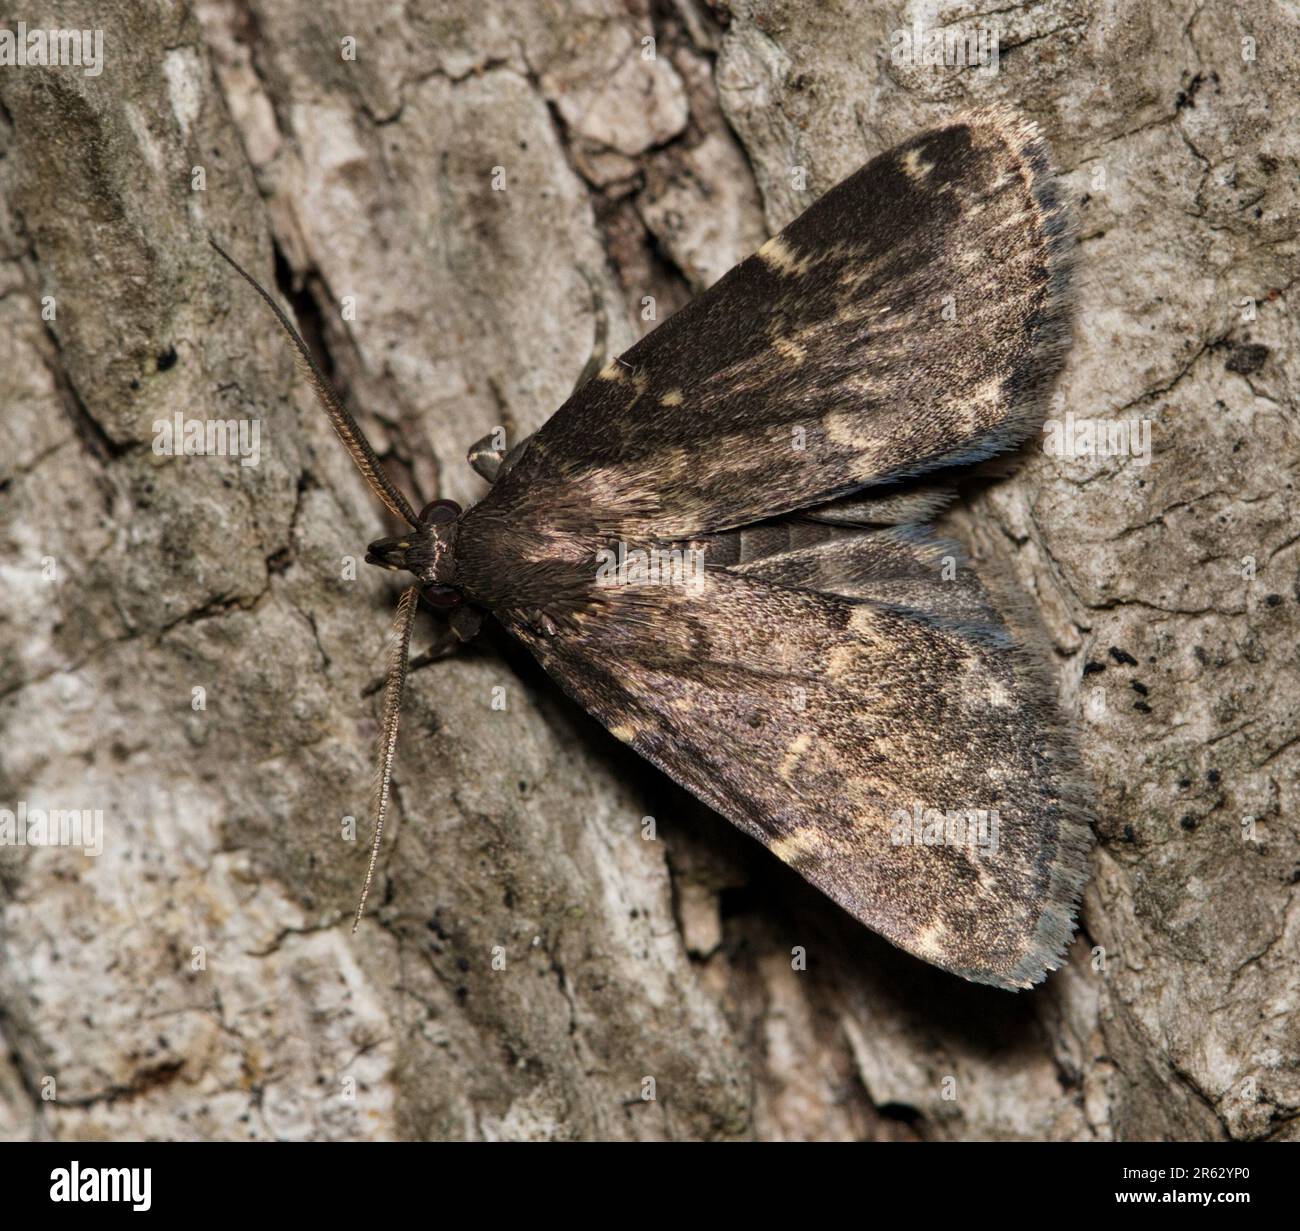 Glossy Black Idia Moth (Idia lubricalis) on pine bark, dorsal view. Species found in the USA and Canada, it feeds on leaf litter, lichen and fungi. Stock Photo